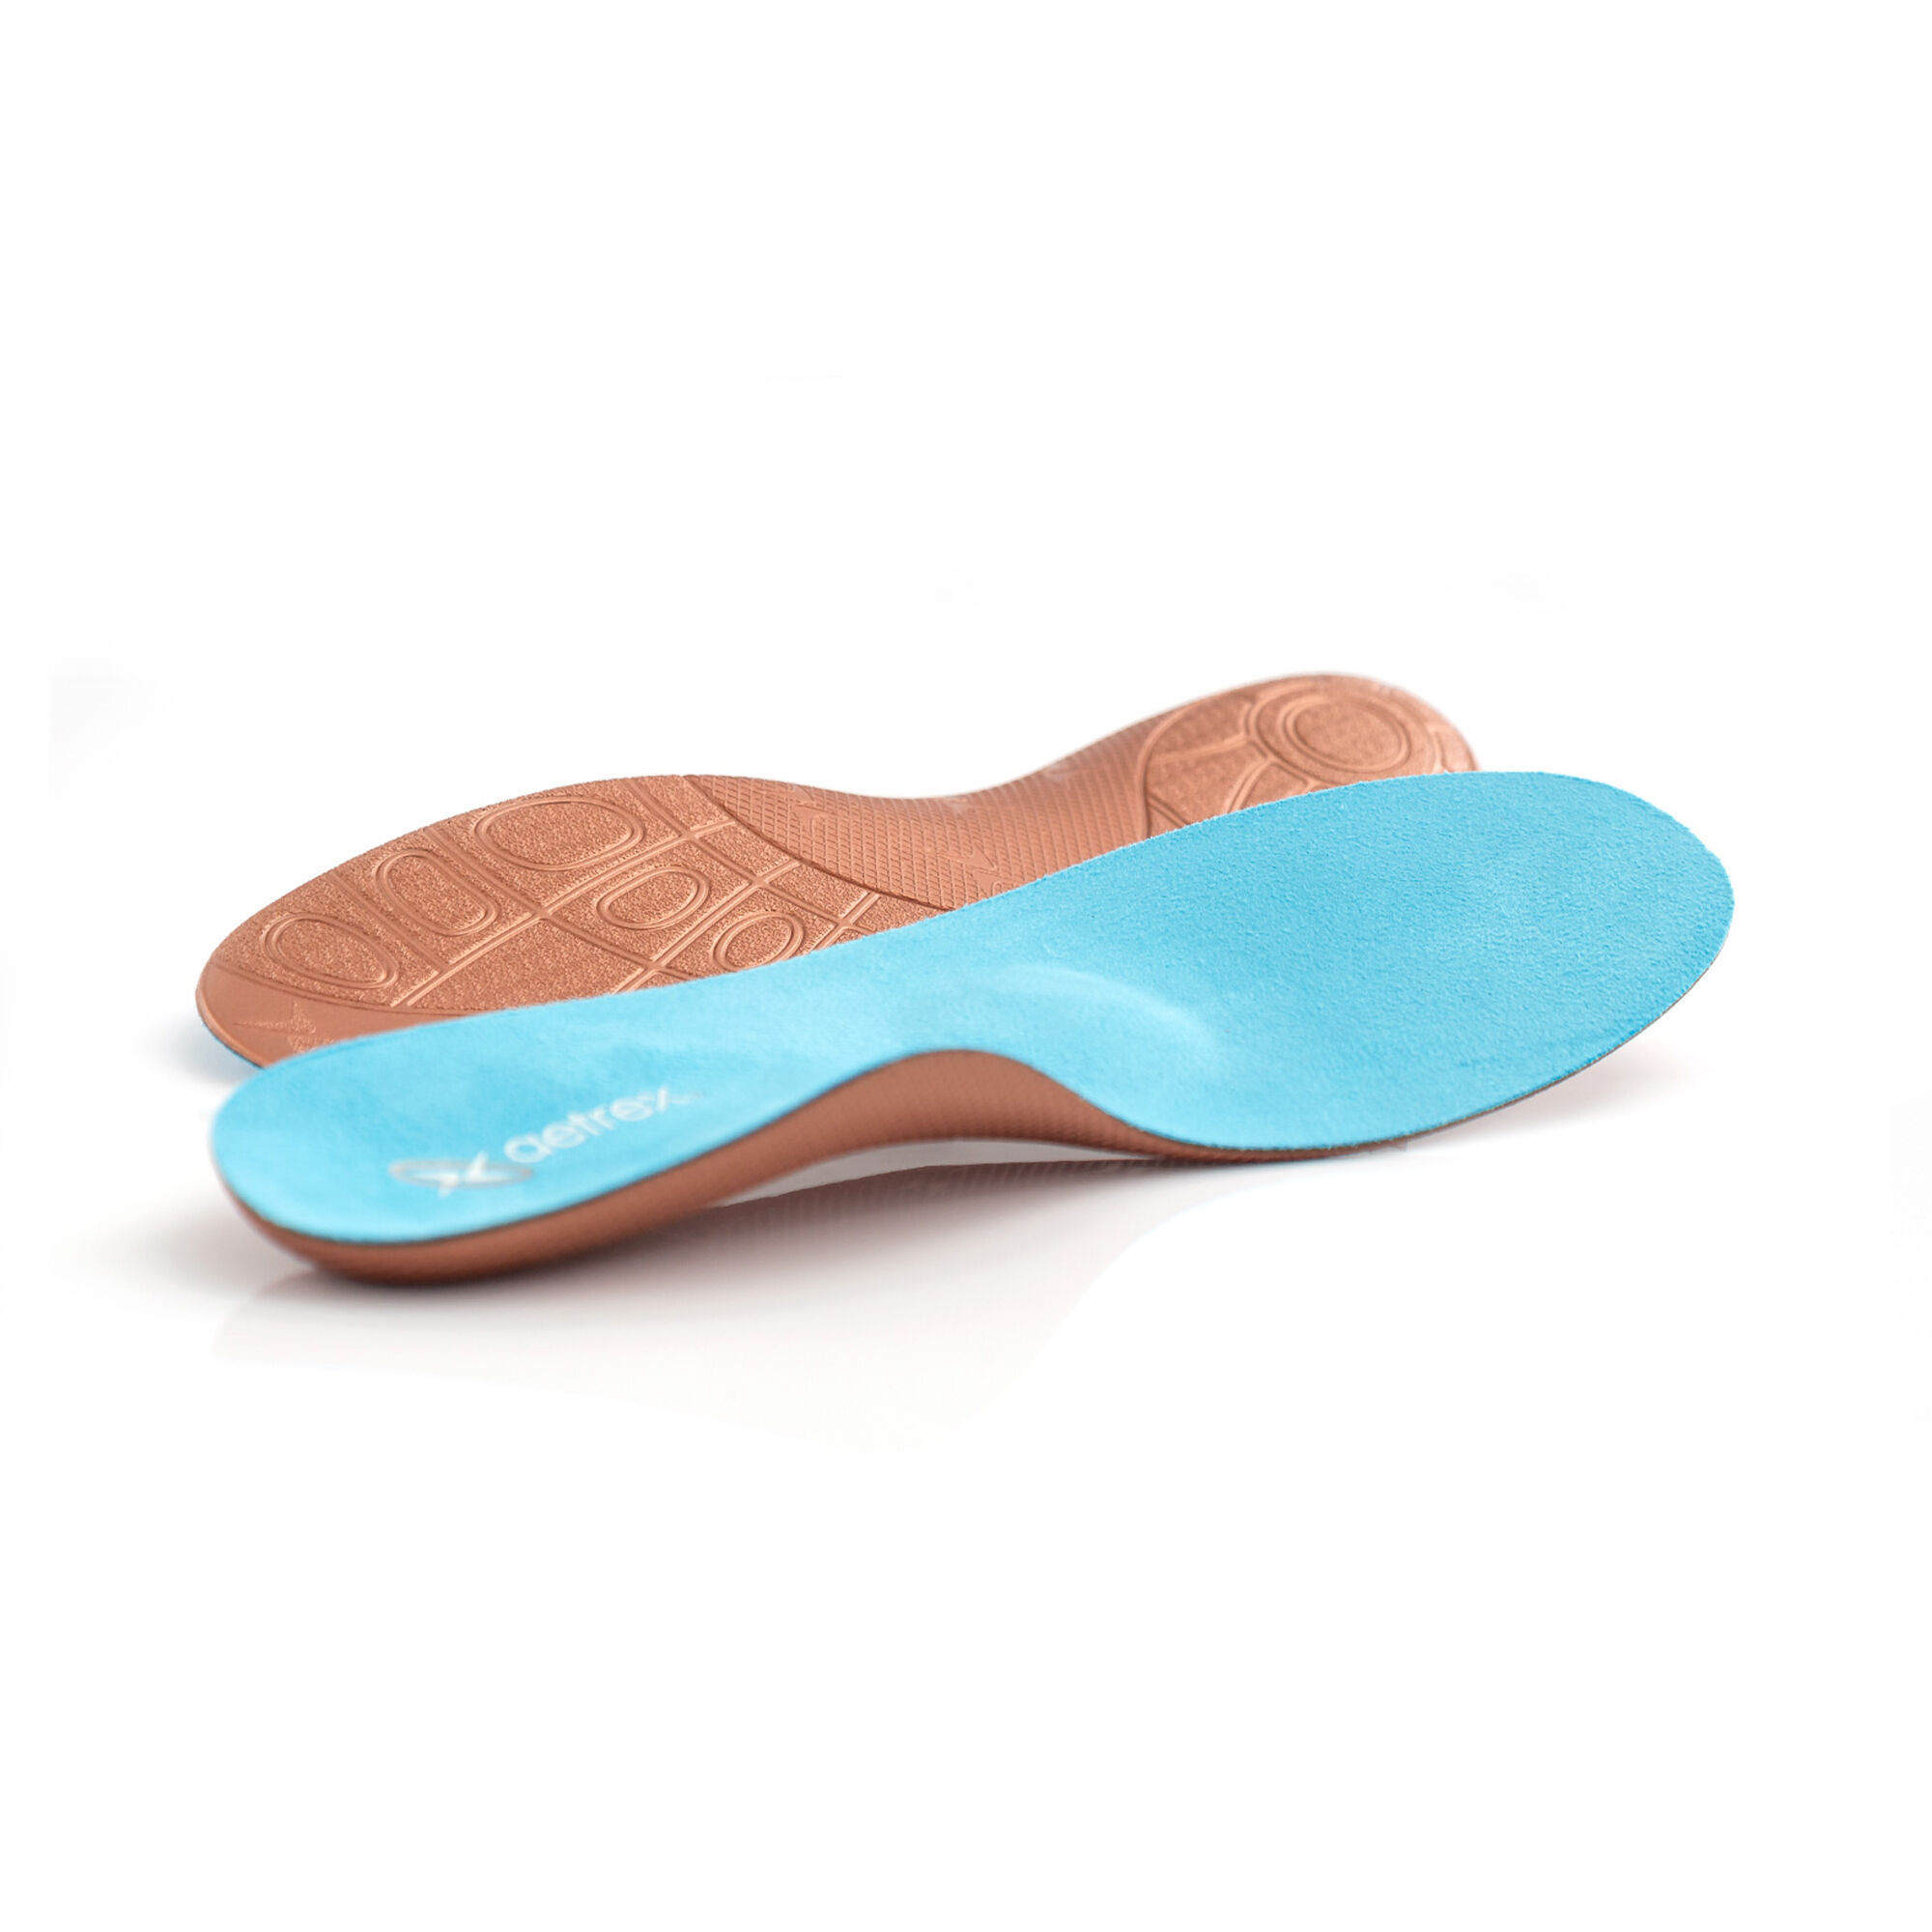 Thinsole Orthotics | Aetrex's Thin Insoles